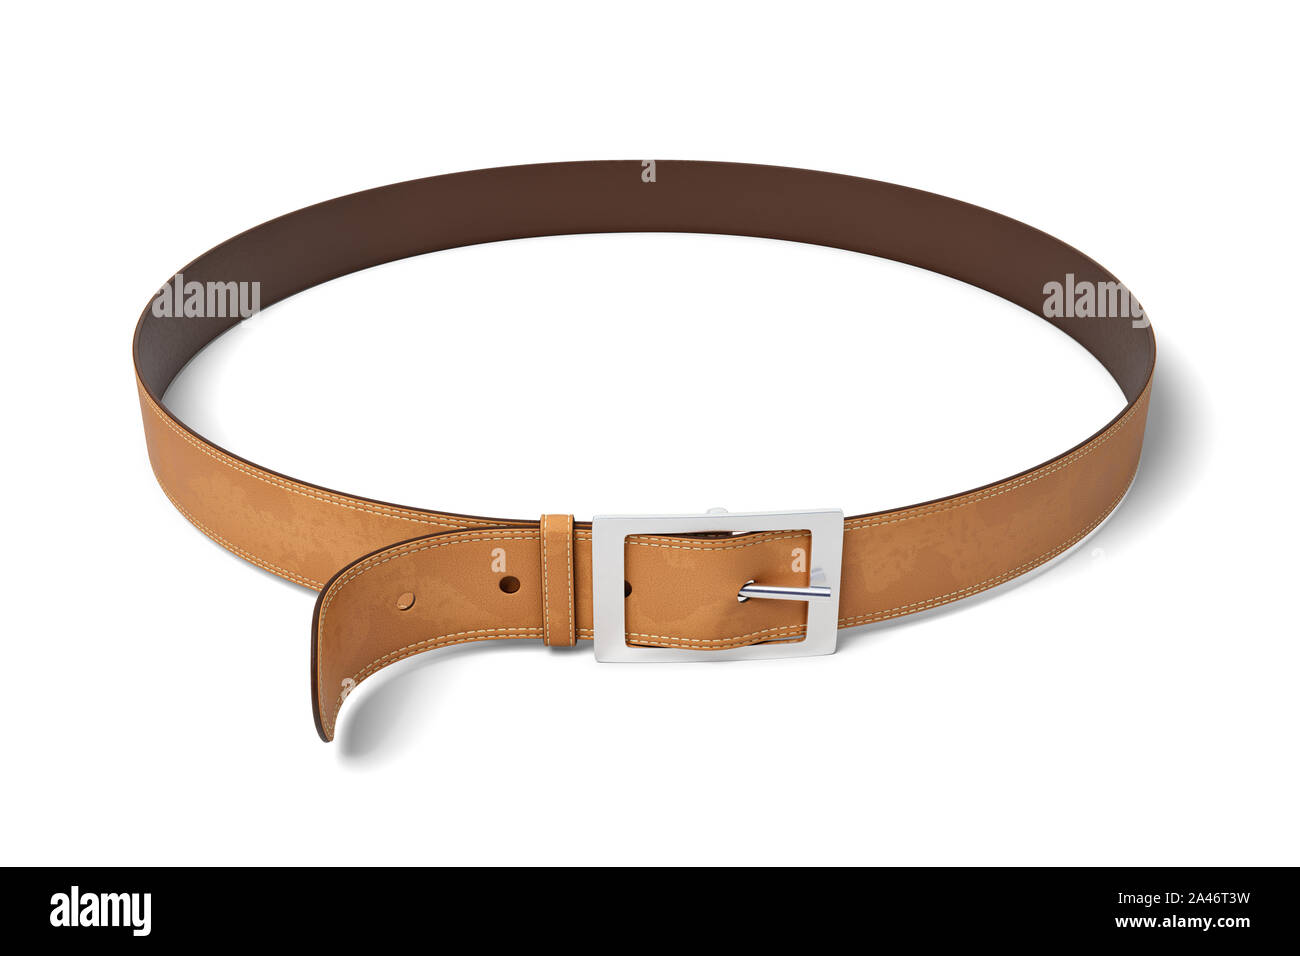 3d rendering of brown leather belt with metal buckle isolated on white background. Clothing and accessories. Natural materials. Leather goods. Stock Photo